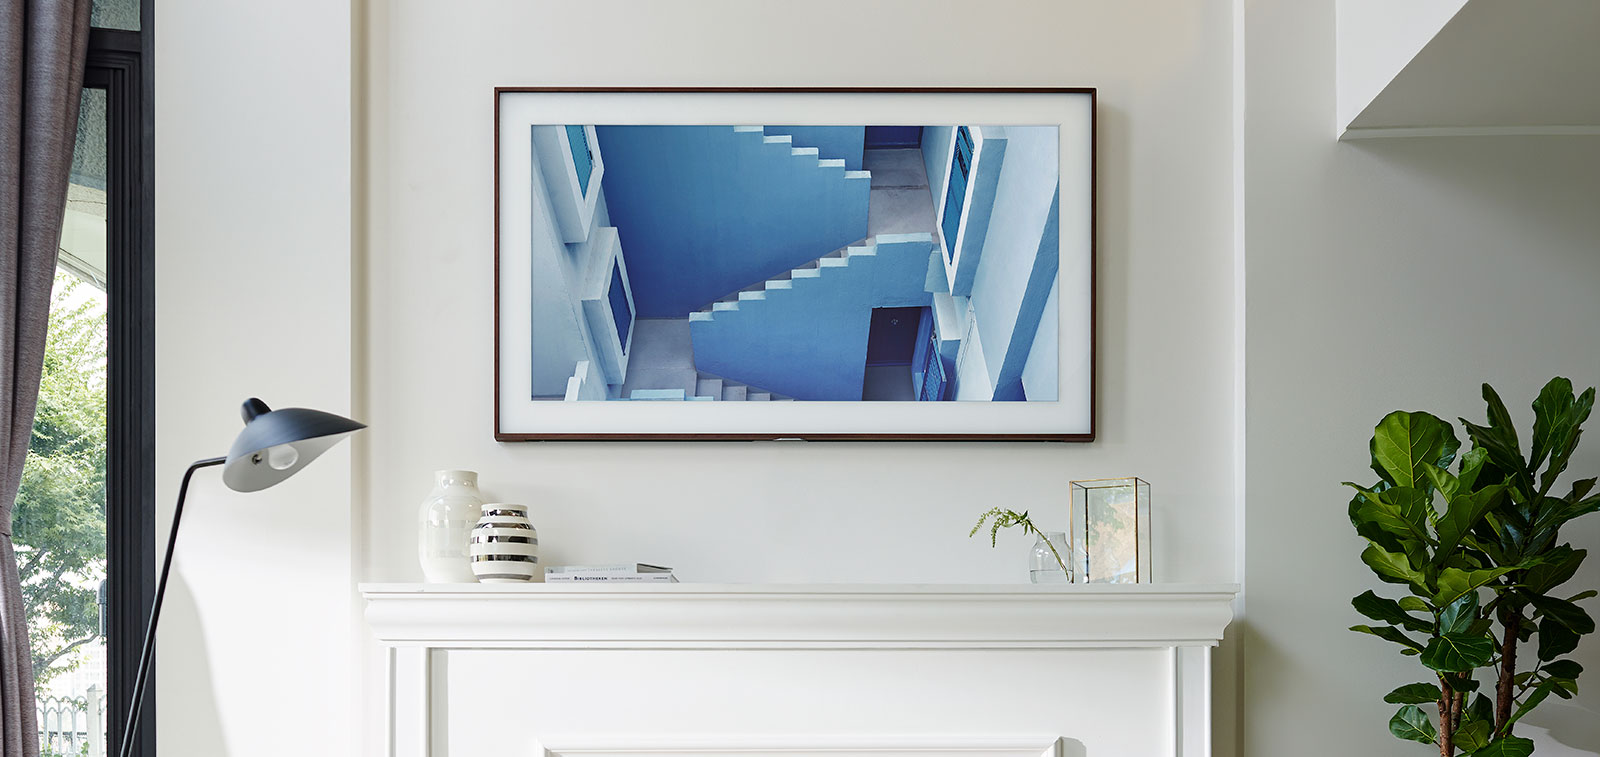 how to turn off samsung frame tv